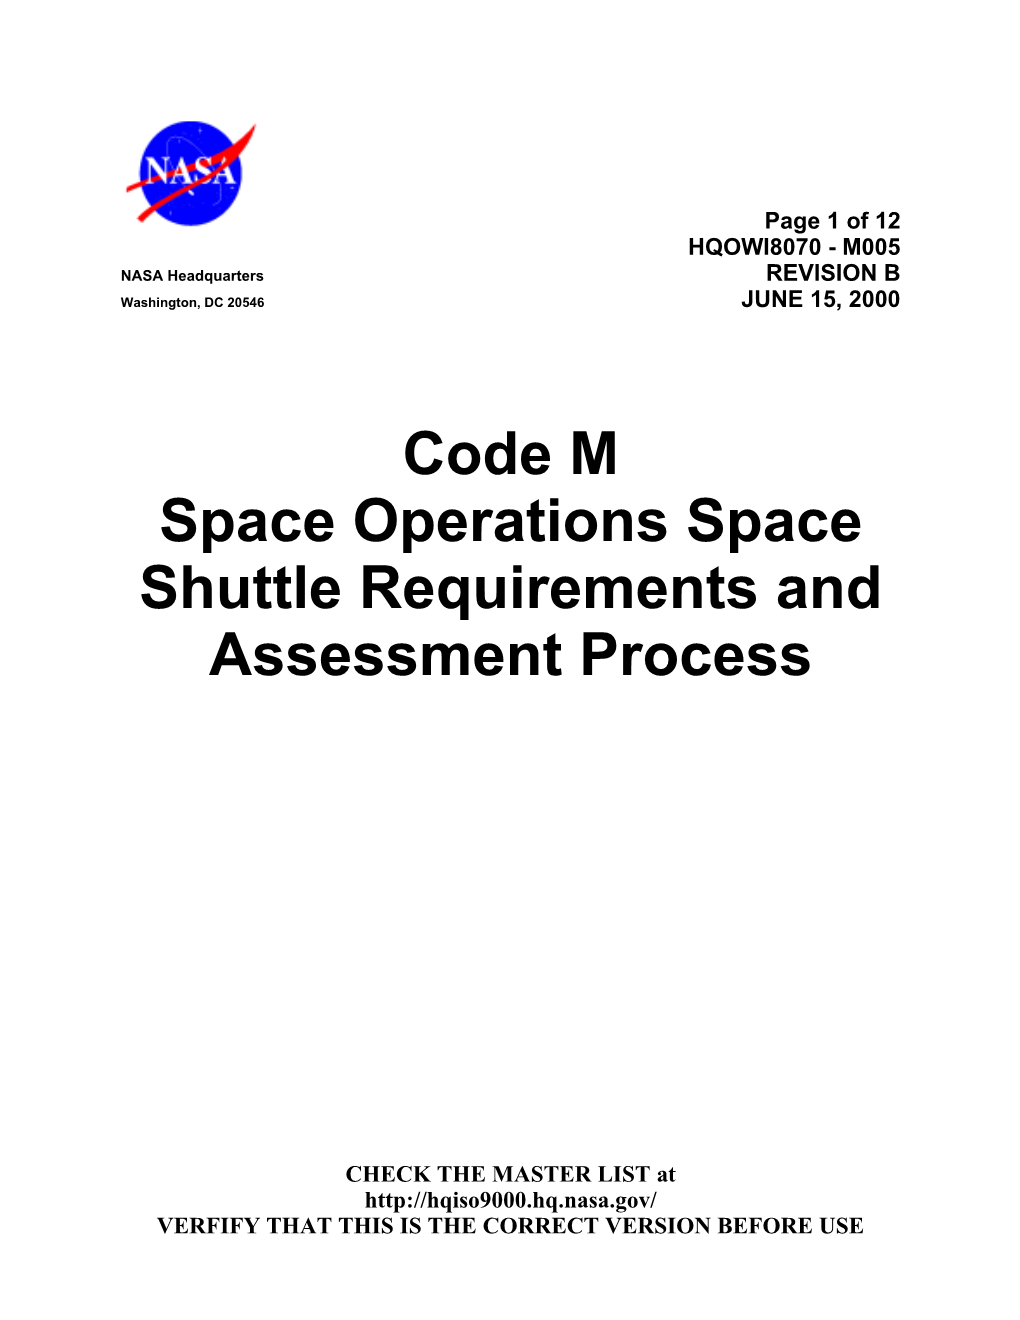 Space Operations Space Shuttle Requirements and Assessment Process